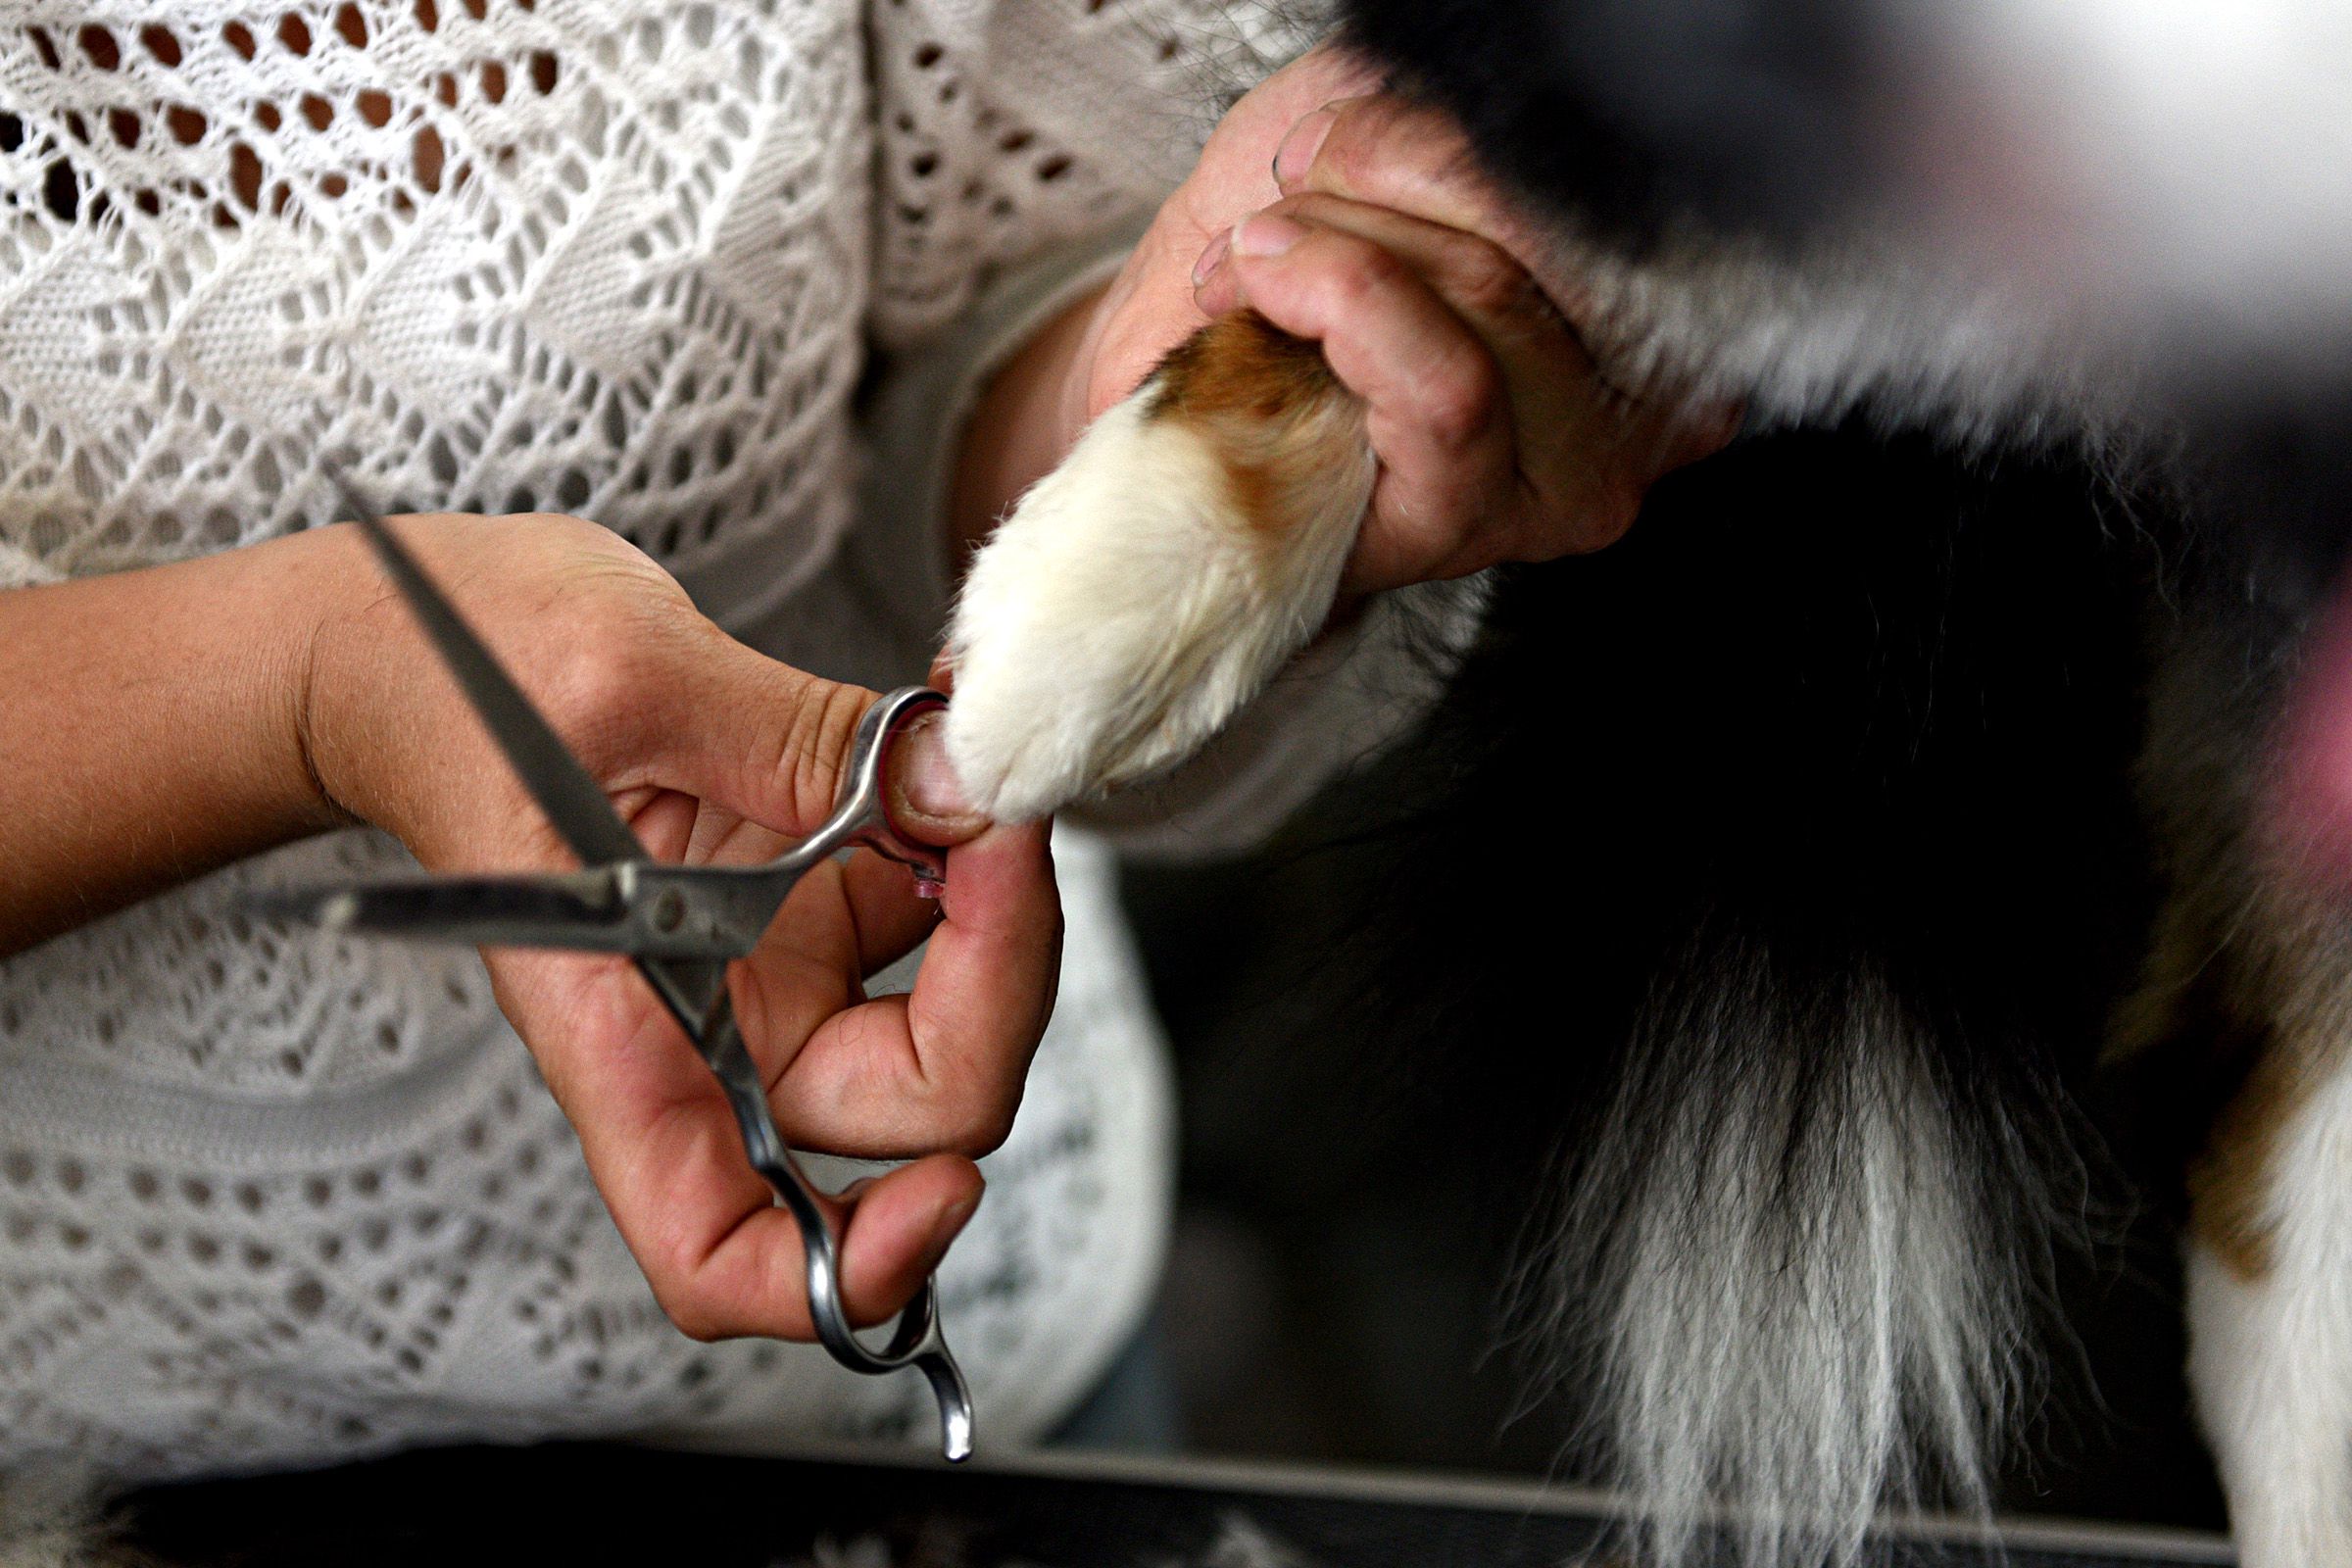 Samantha Stanford trims fur from Smokey's paws after a bath in her mobile grooming trailer in Canaan, N.H., on Friday, June 28, 2019. (Valley News - Jennifer Hauck) Copyright Valley News. May not be reprinted or used online without permission. Send requests to permission@vnews.com.